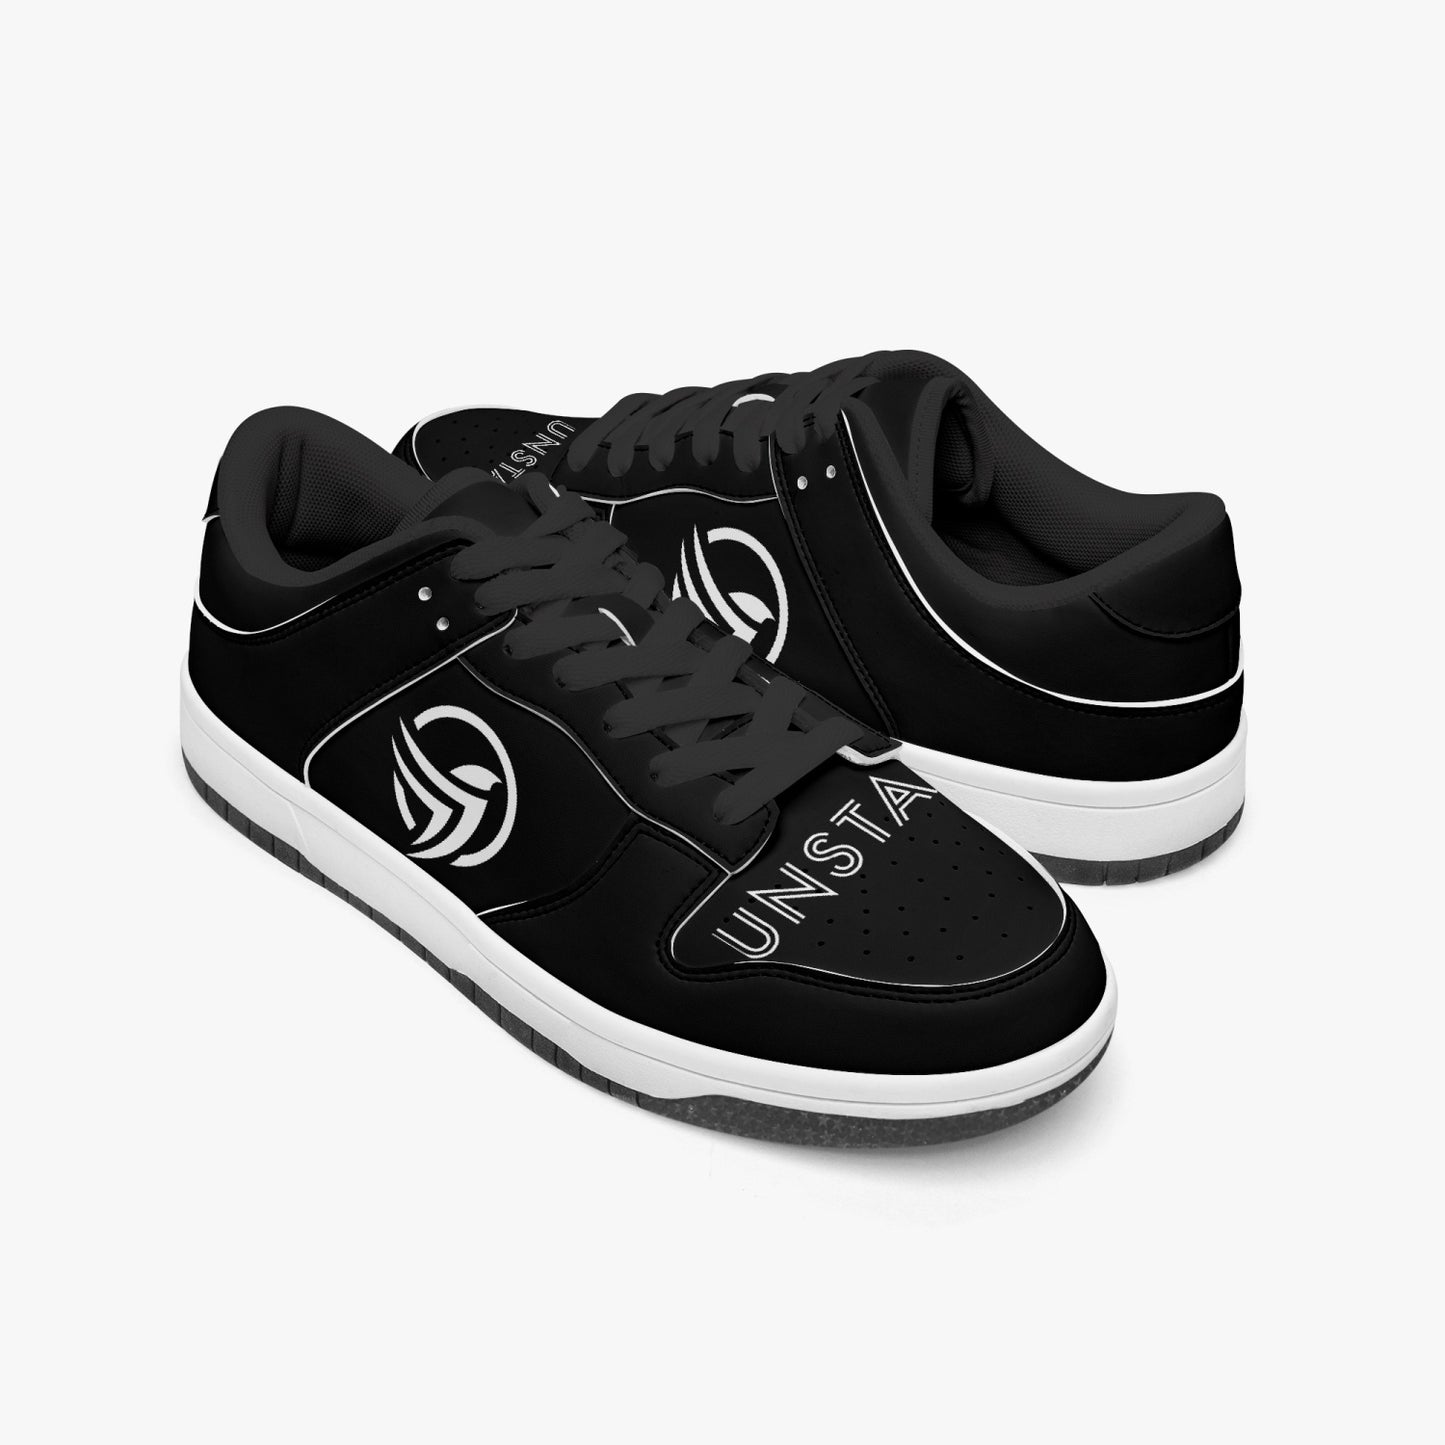 Unstax Black/White Dunk Stylish Low-Top Leather Sneakers